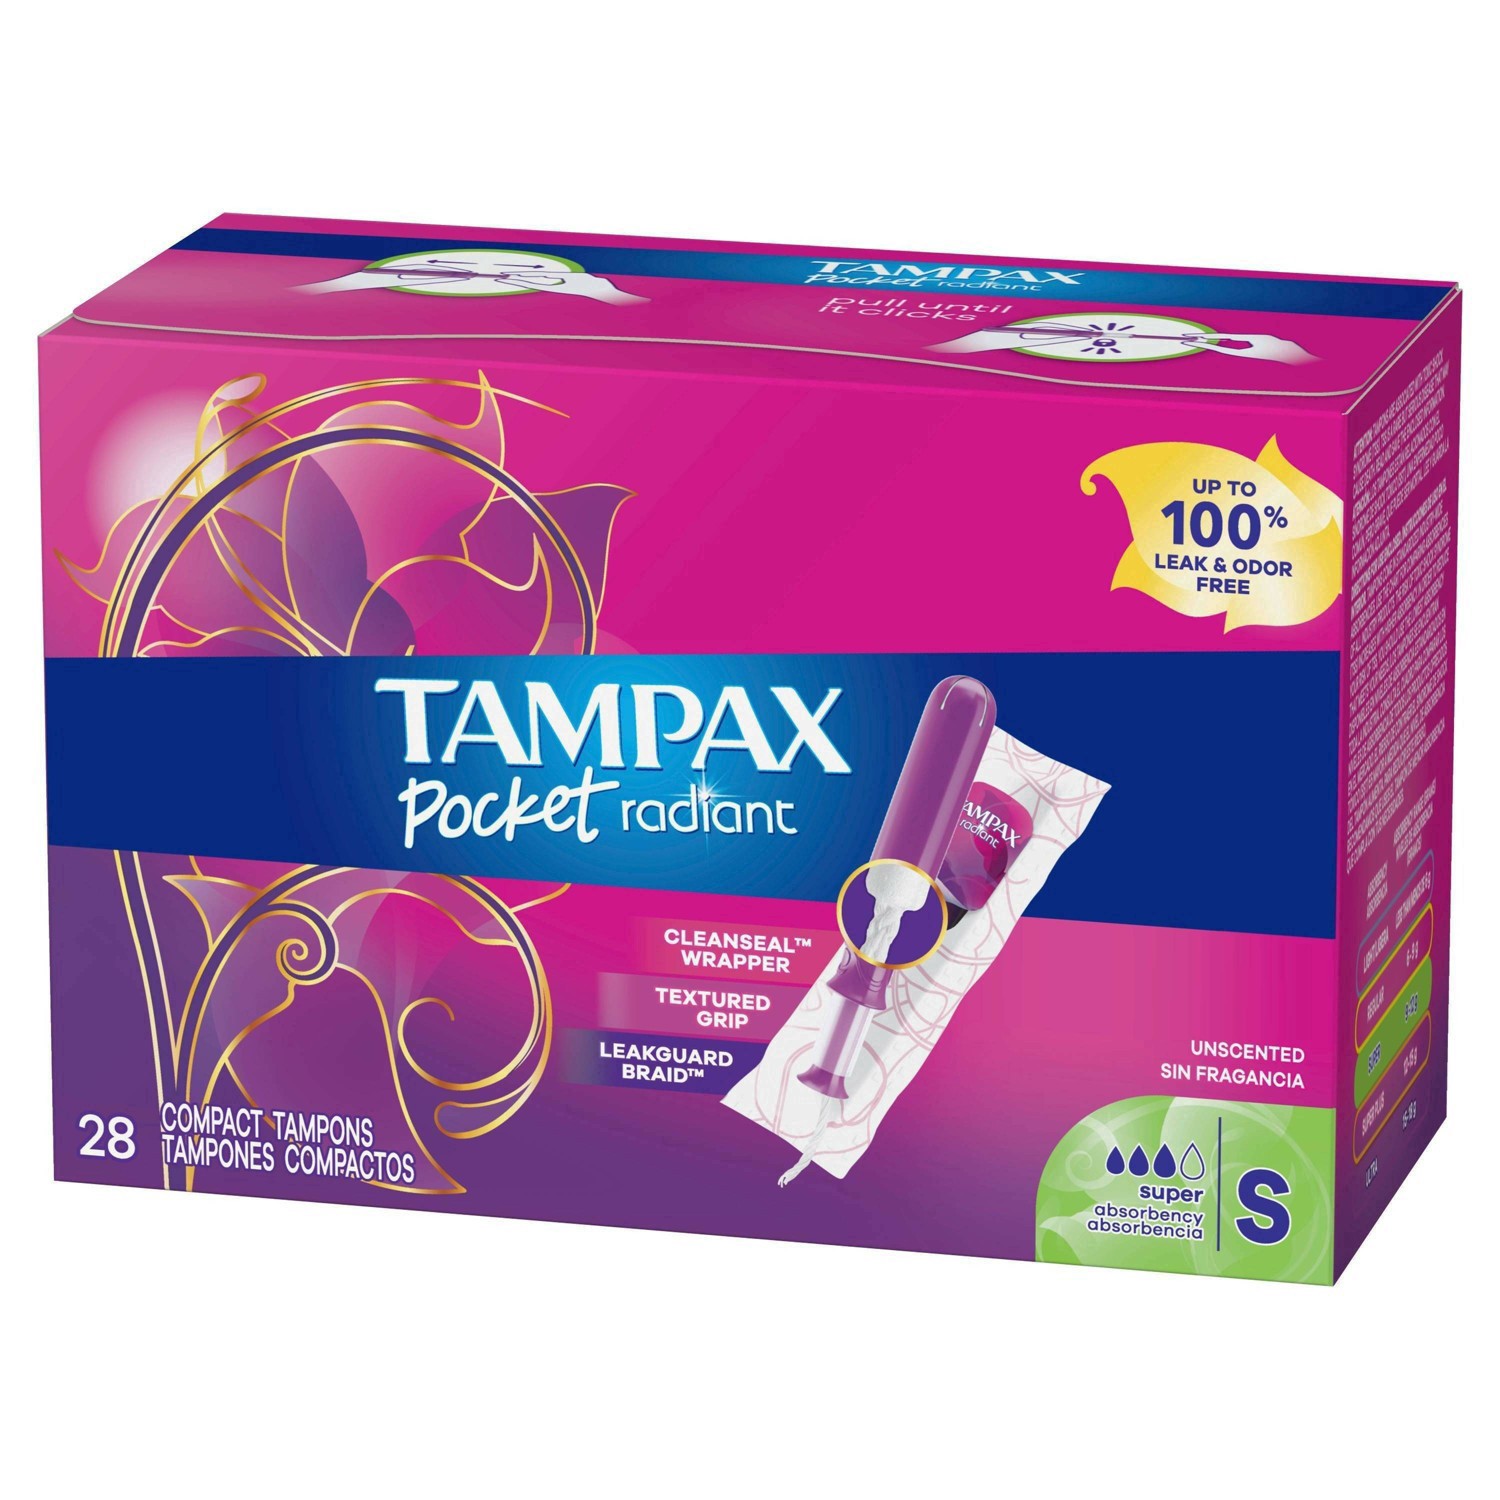 slide 9 of 94, Tampax Pocket Radiant Compact Plastic Tampons, With LeakGuard Braid, Super Absorbency, Unscented, 28 Count, 28 ct